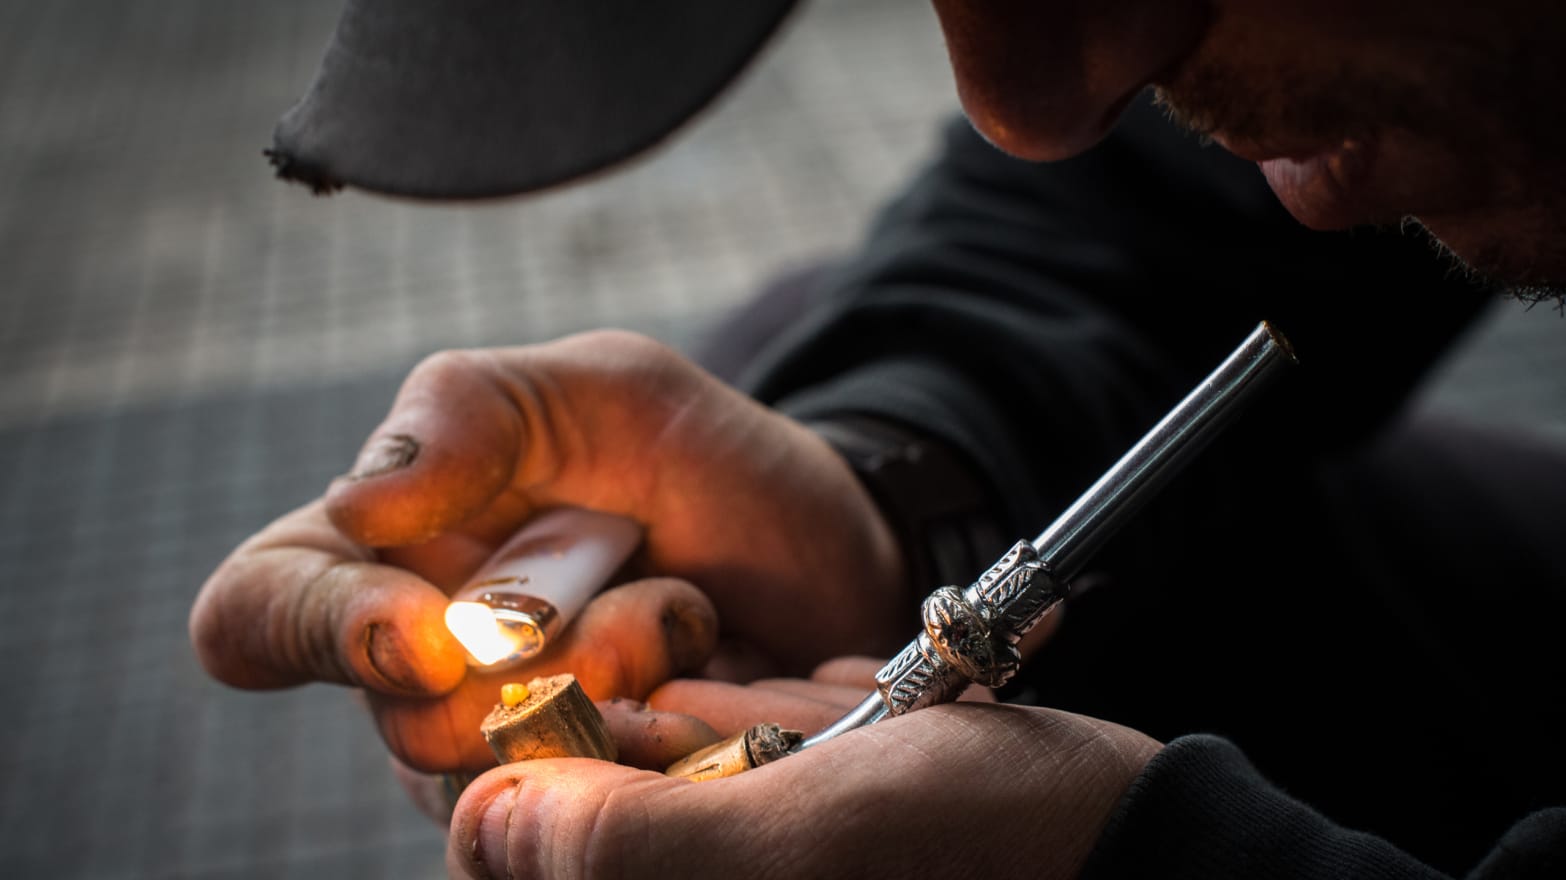 Free Crack Pipe Advocates Plan SF Giveaway Despite City Opposition - CBS  San Francisco